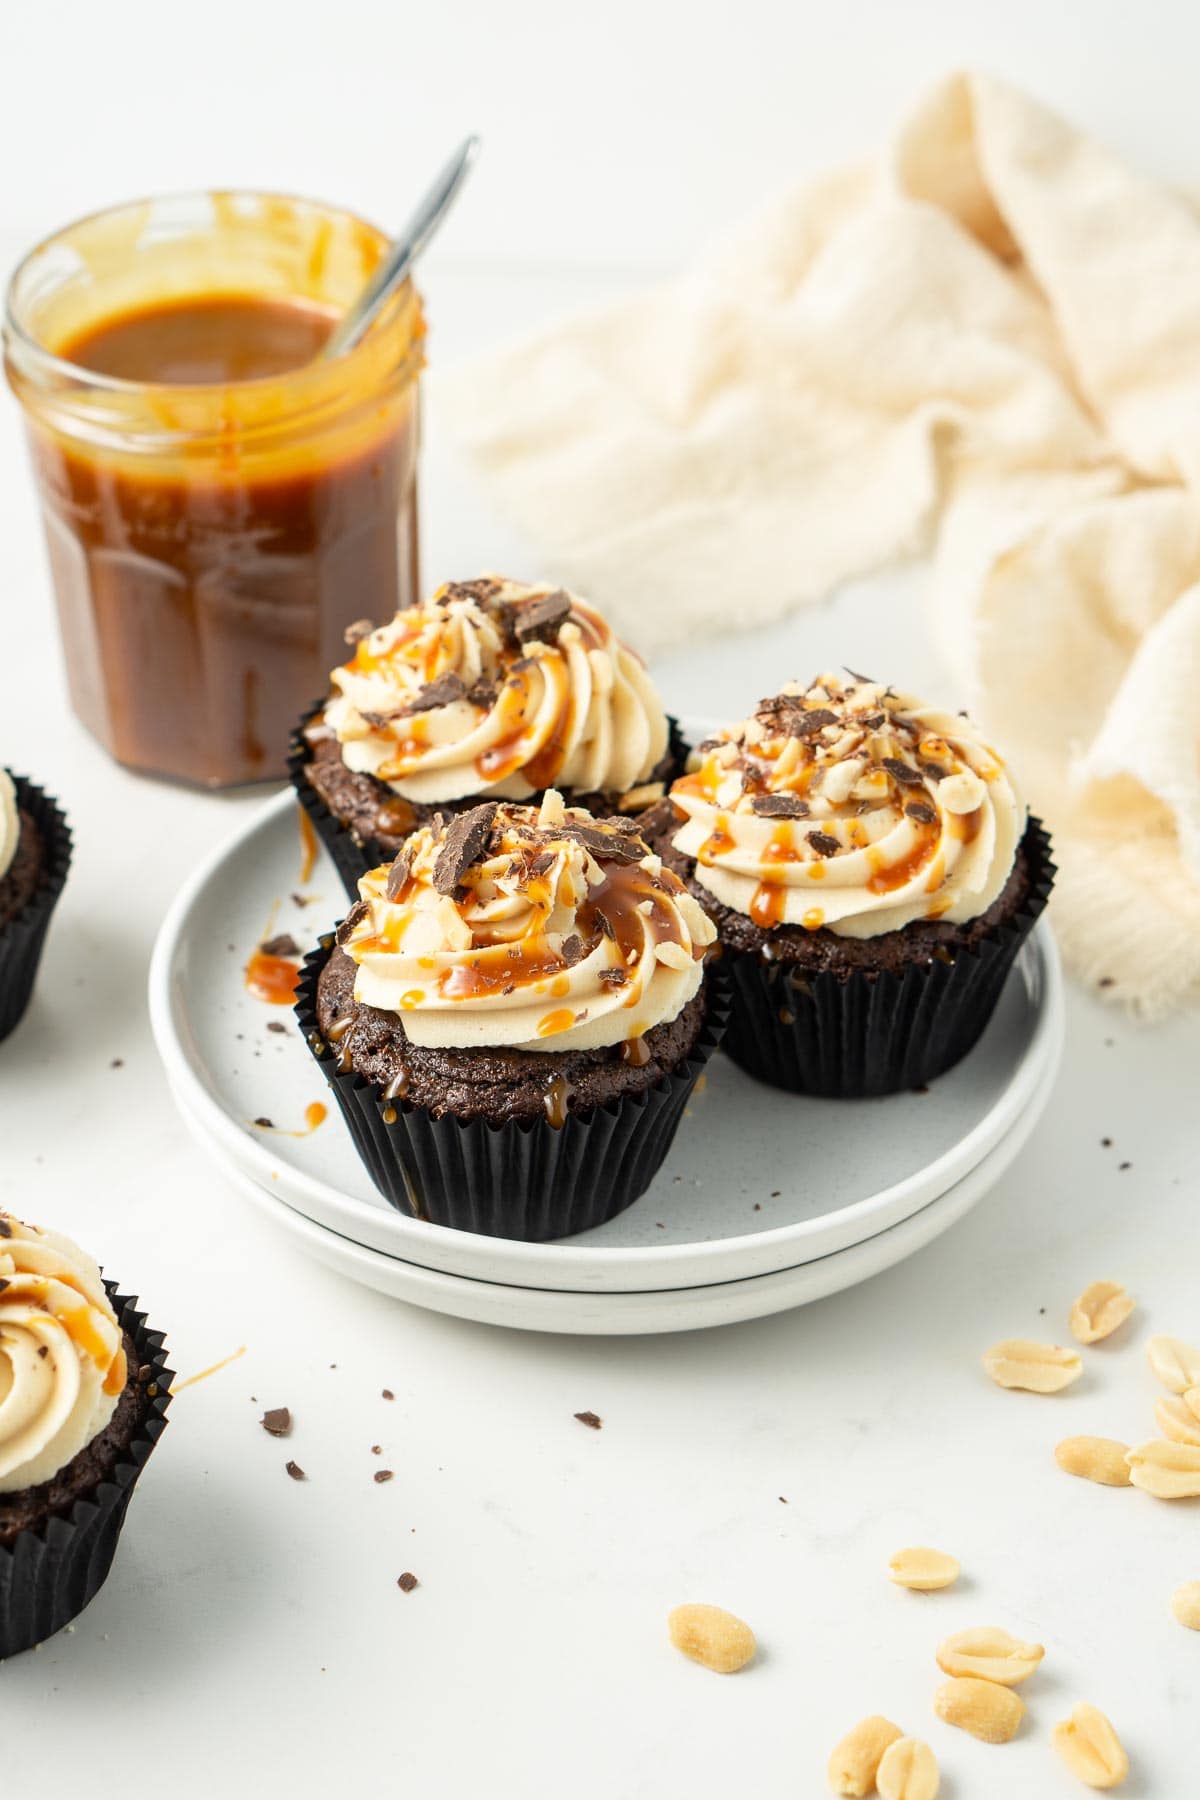 Three snickers cupcakes on a white plate with vegan caramel sauce.